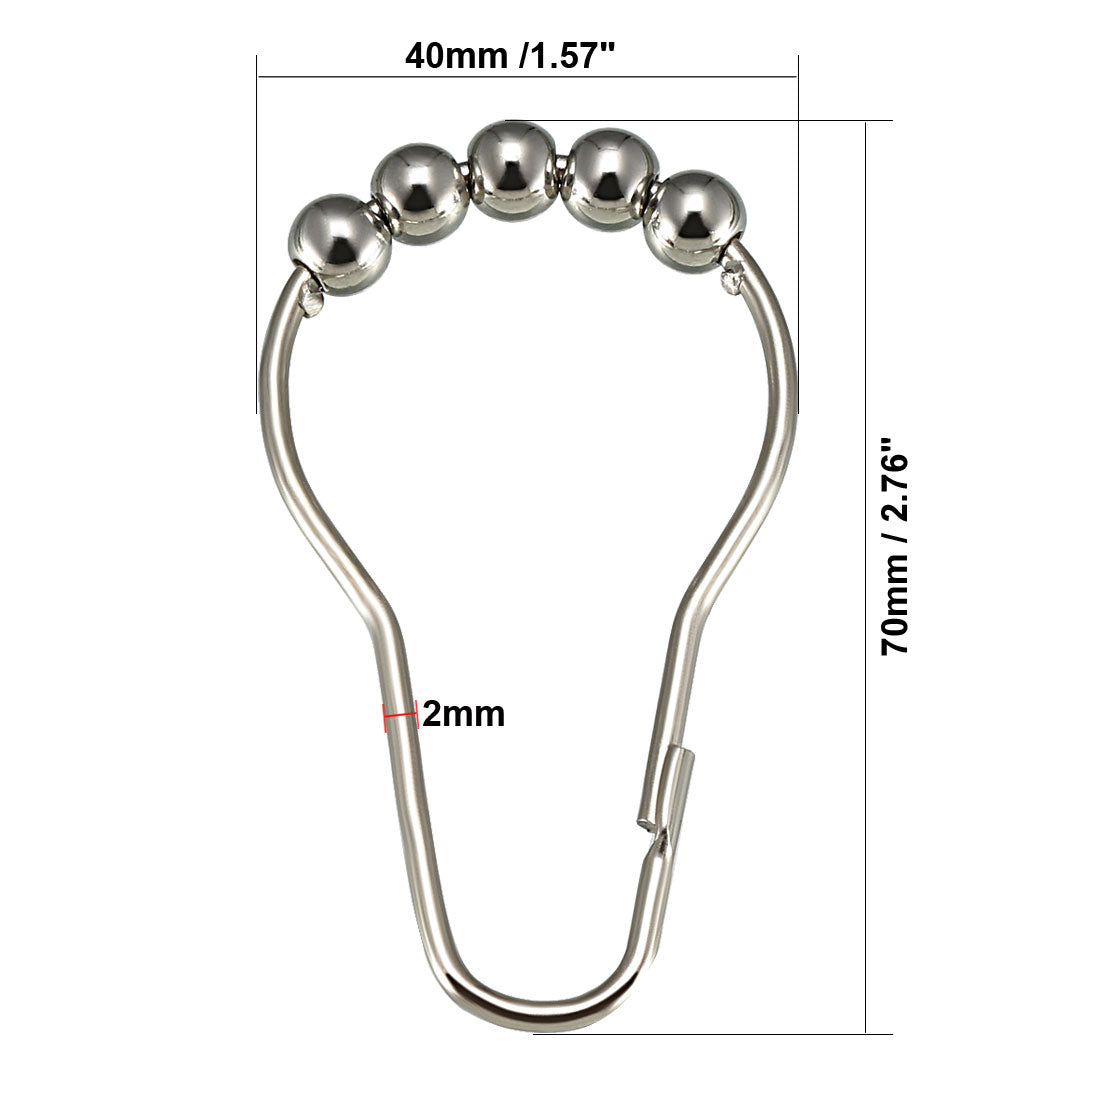 uxcell Uxcell Shower Curtain Ring Hooks Metal for Bathroom Shower Rods Curtains Liners Iron Ball 4 Pcs